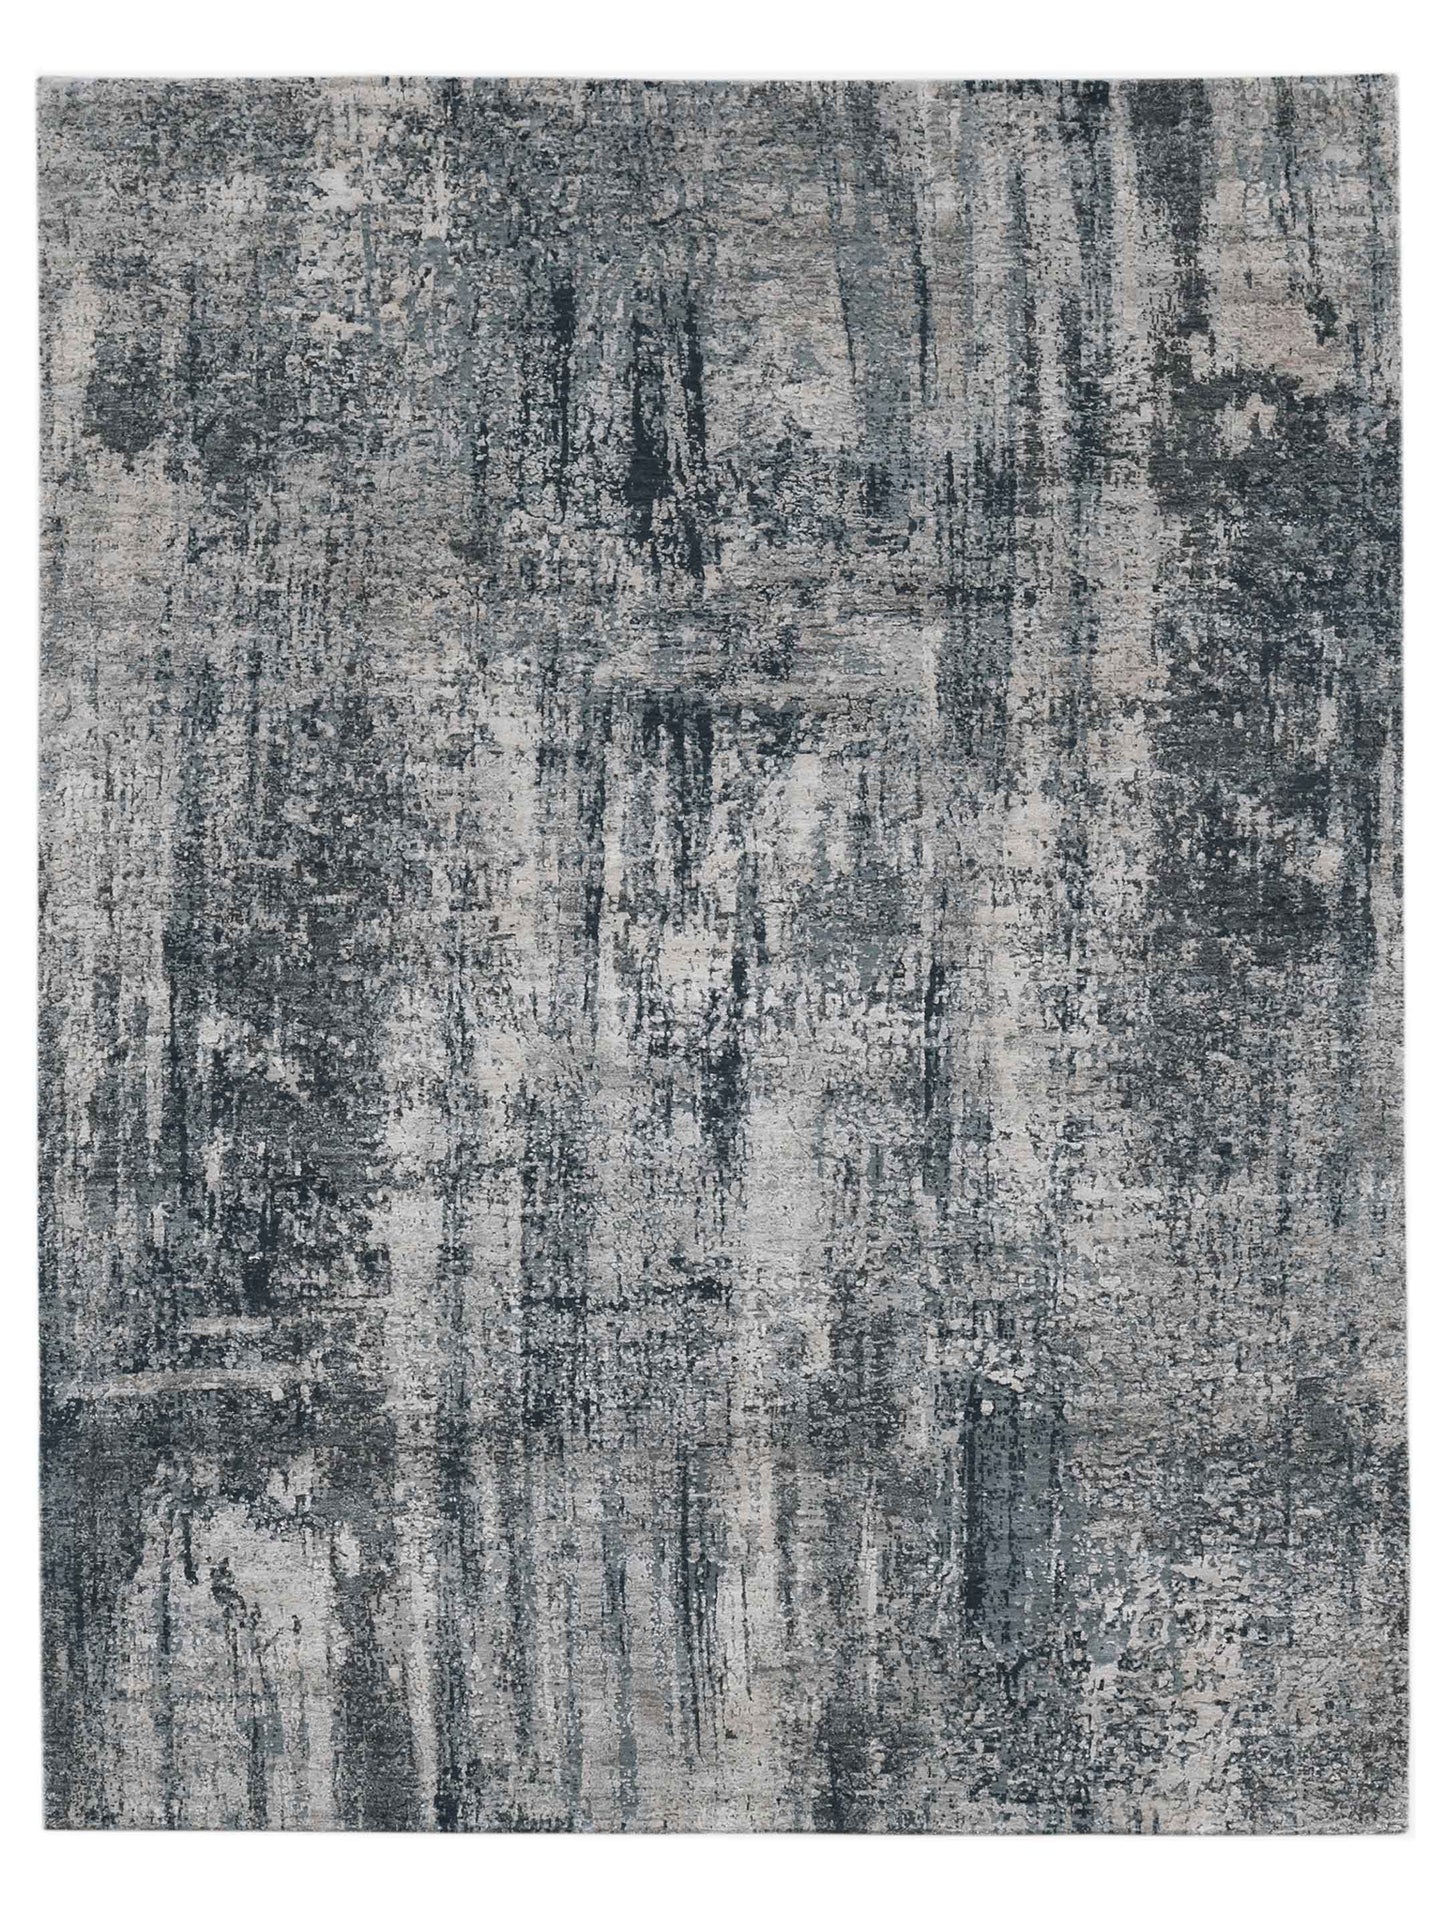 Limited Zelma WI-452 GRAPHITE Transitional Knotted Rug